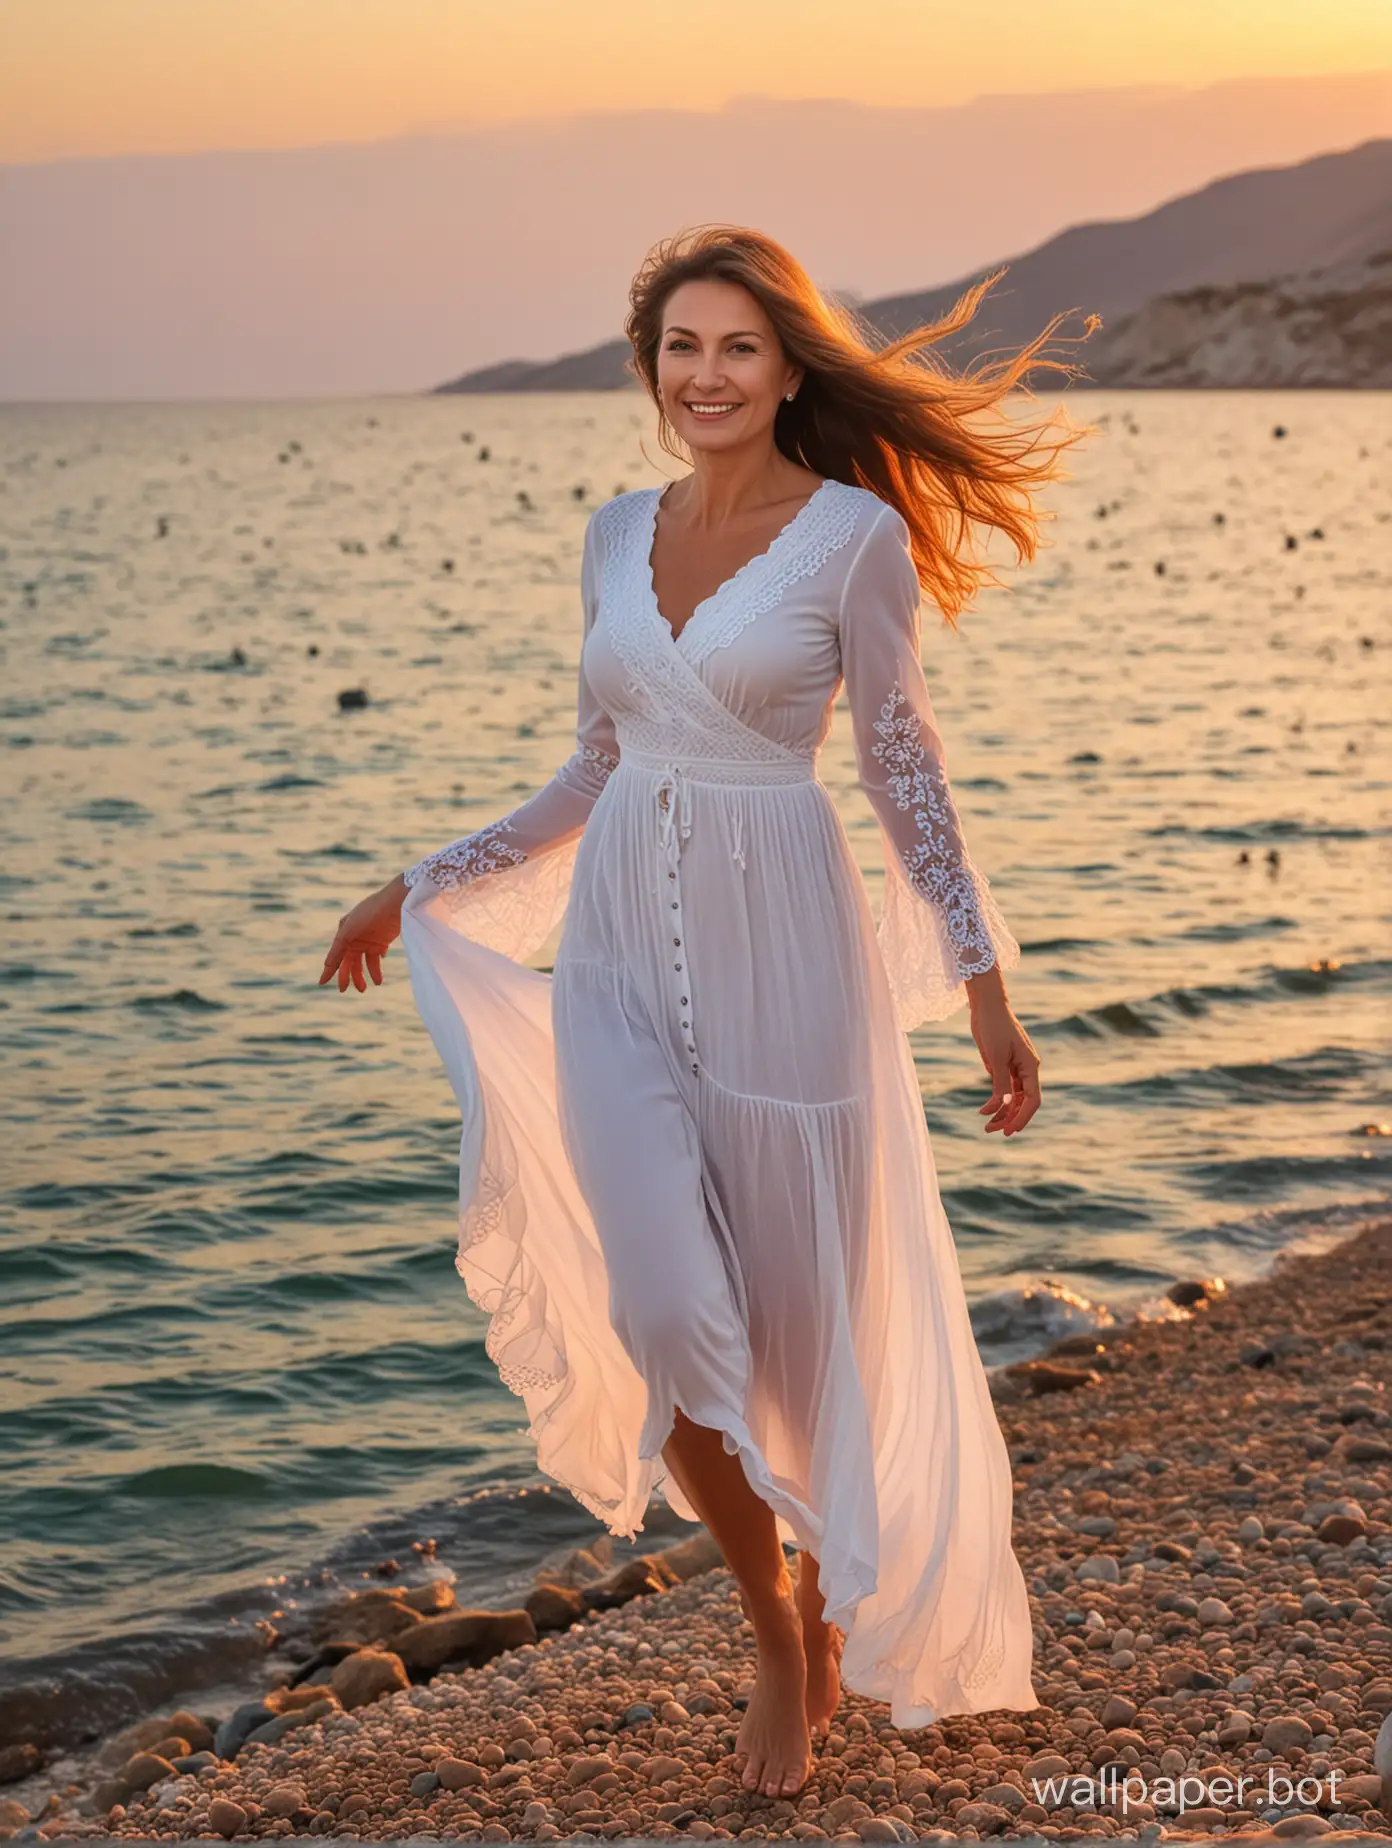 Beautiful Russian woman 50 years old at sunset by the sea in Crimea, full height, smile, dynamic poses, birds